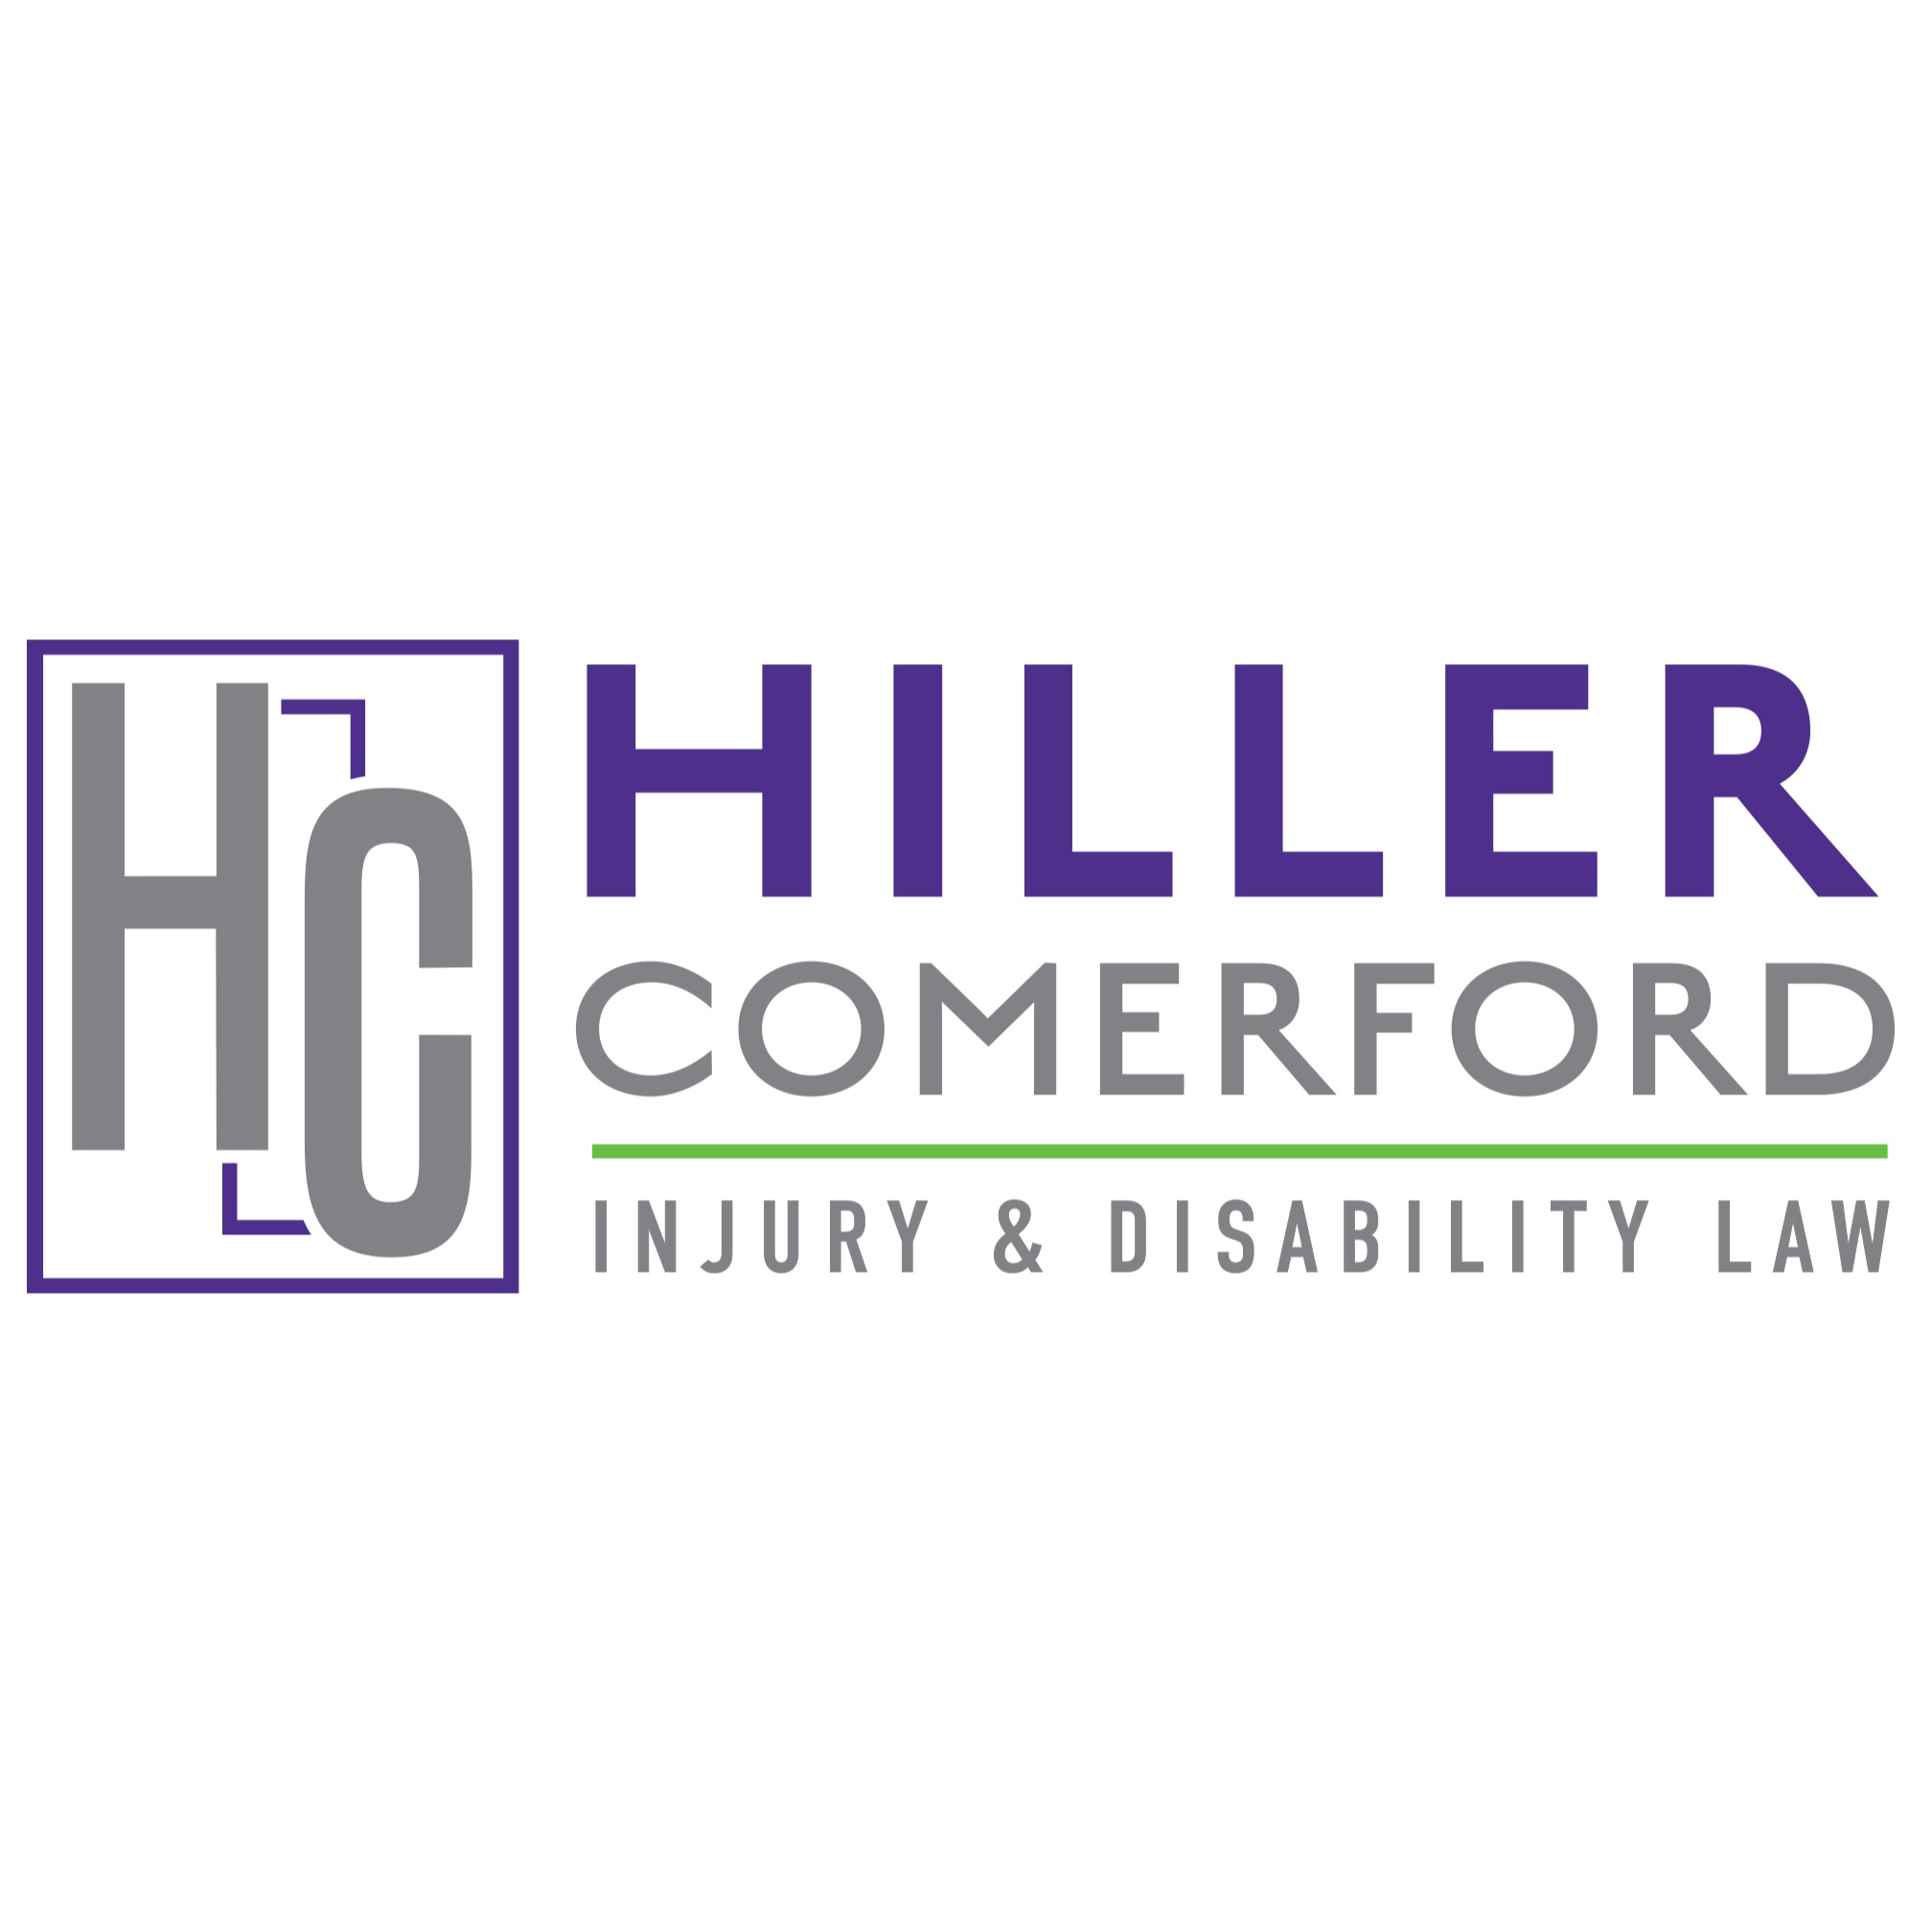 Hiller Comerford Injury & Disability Law - Personal Injury & Social Security Disability Attorneys in Hiller Comerford Injury & Disability Law Rochester (866)445-5375